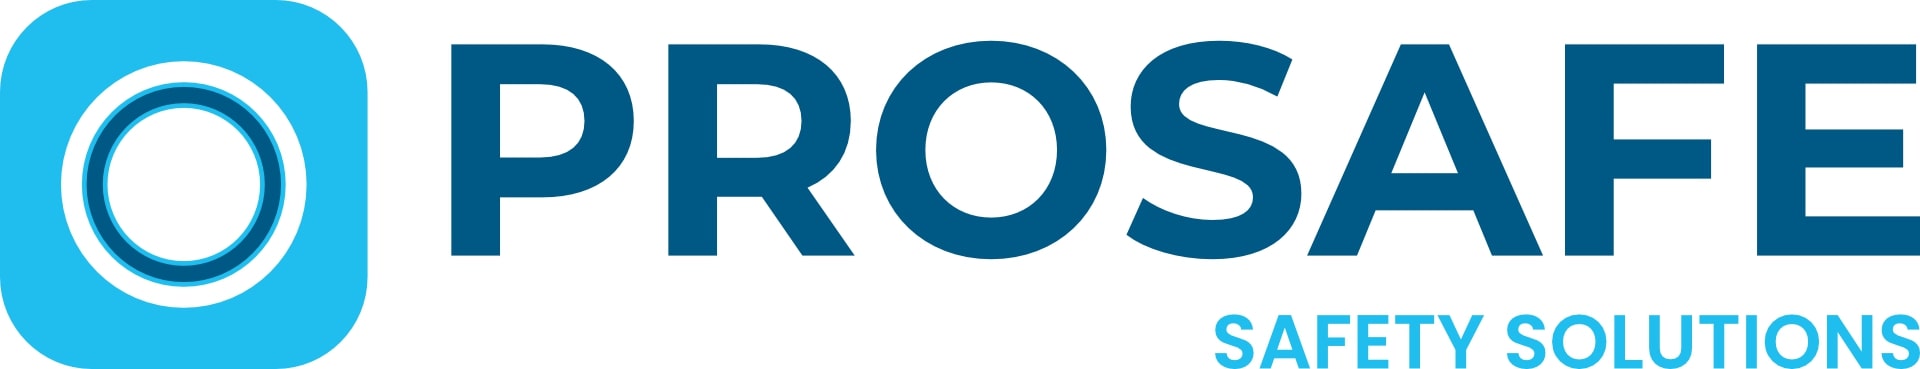 ProSafe logo with slogan - Safety Solutions